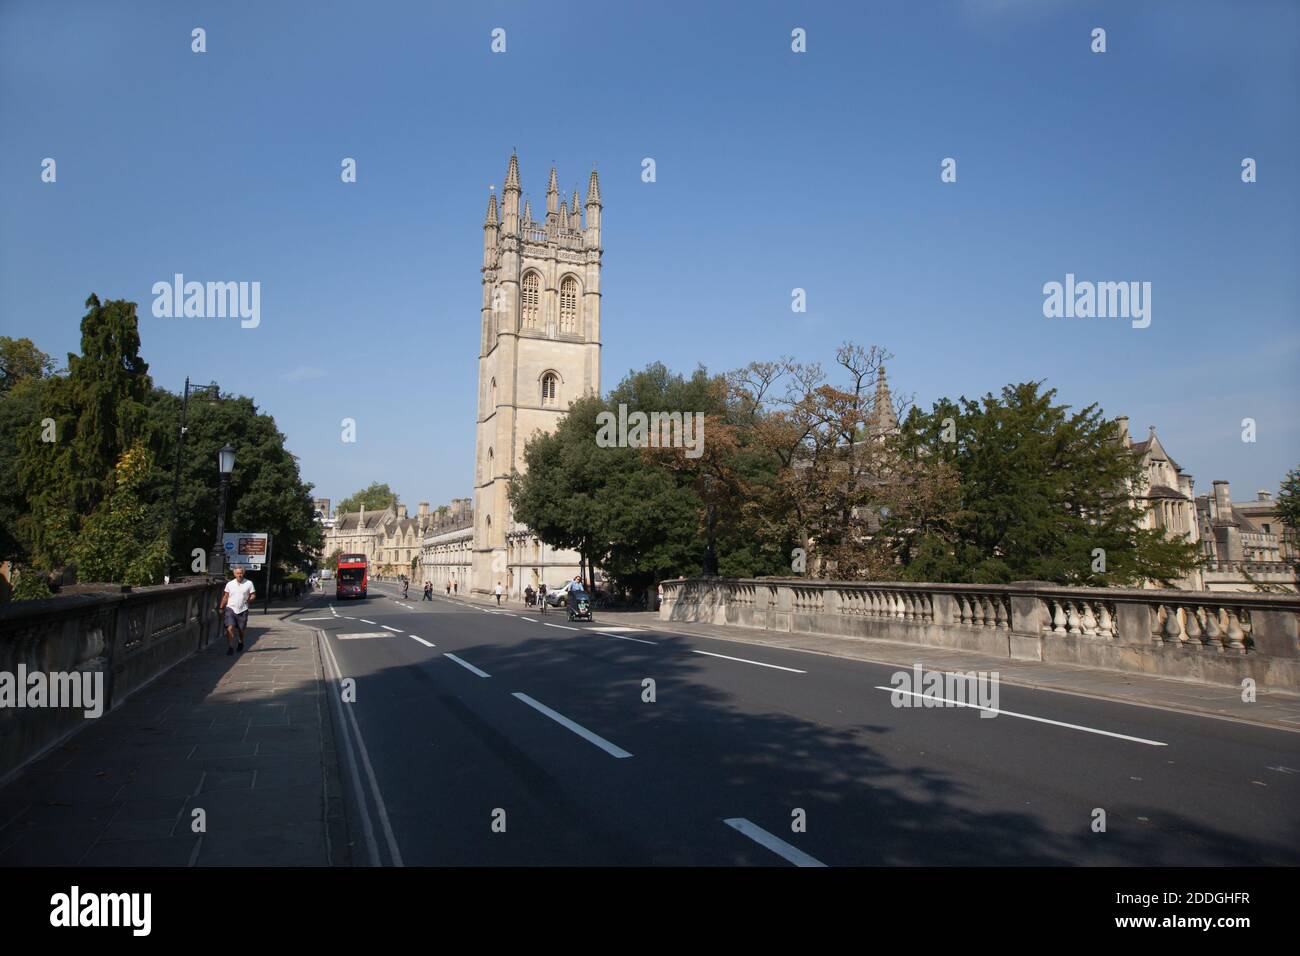 Magdalen Bridge with Magdalen College in Oxford in the UK, taken on the 15th of September 2020 Stock Photo